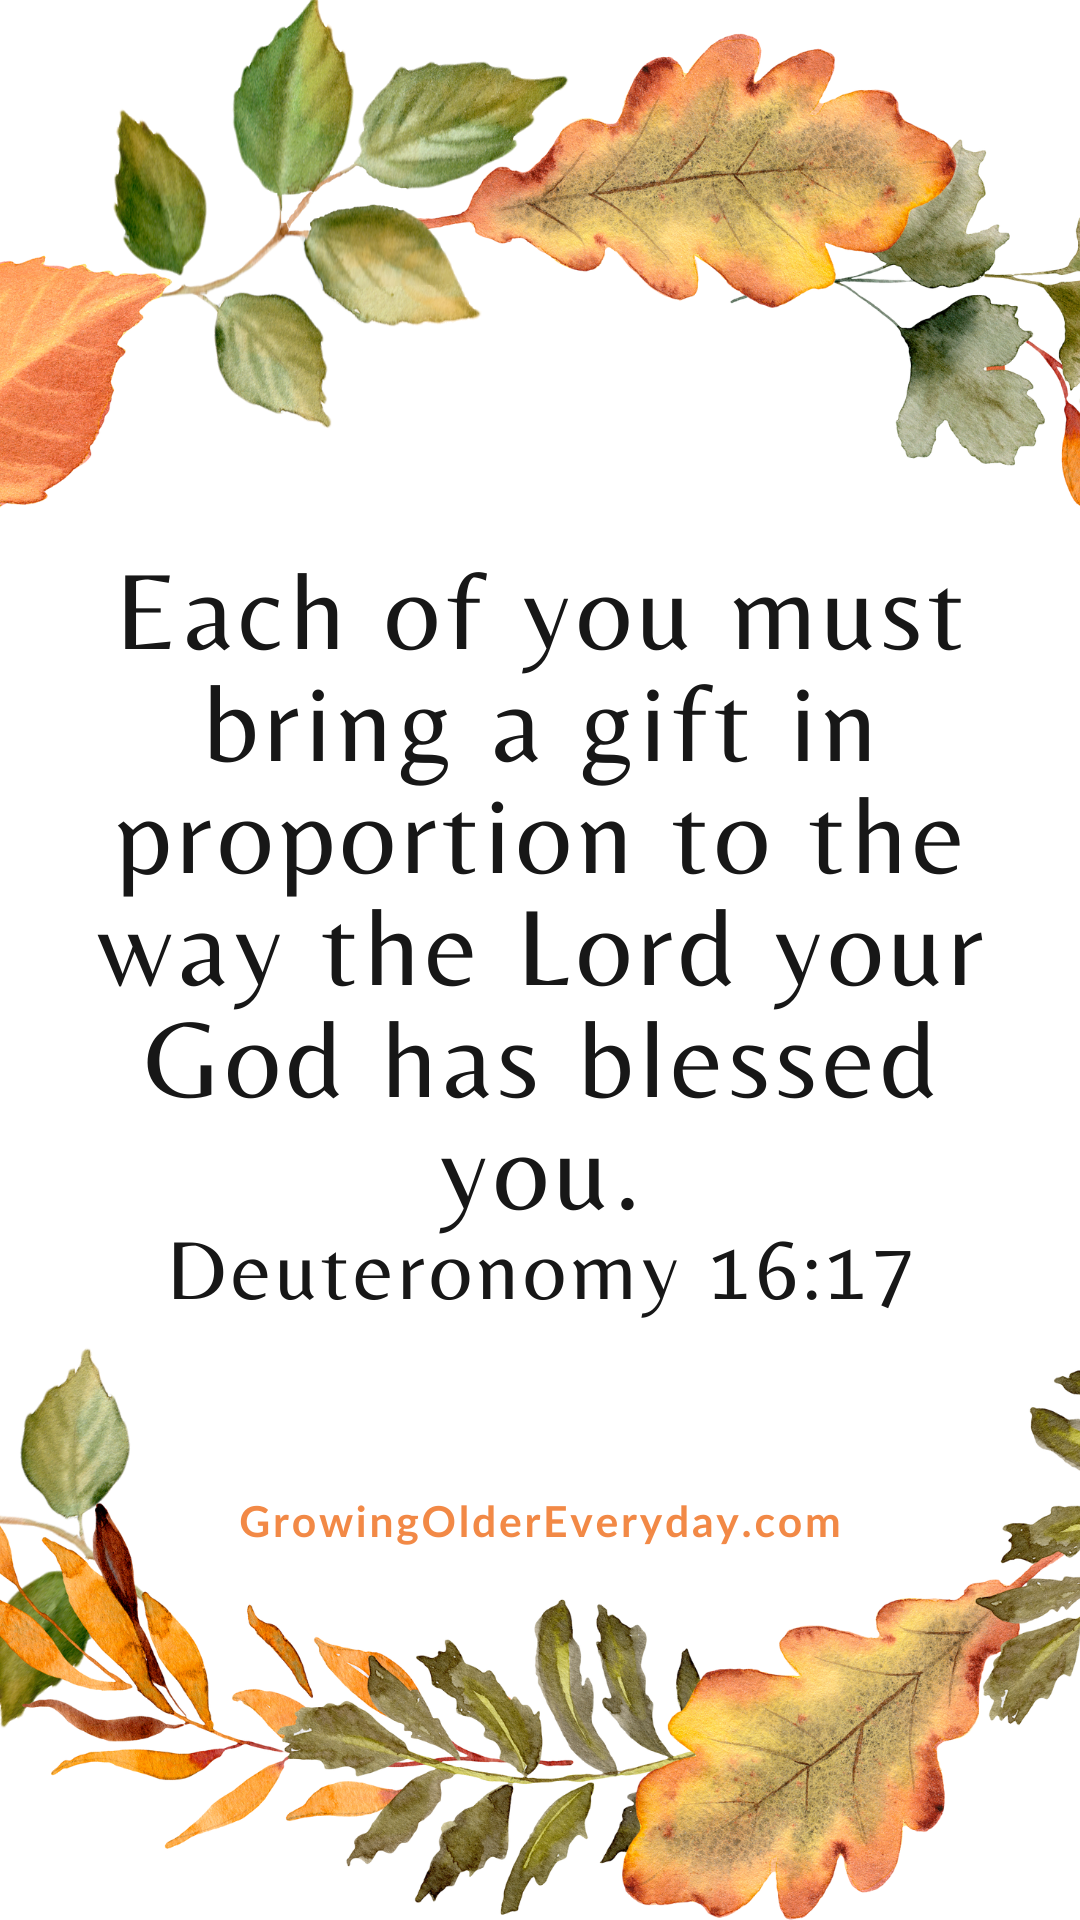 Each of you must bring a gift in proportion to the way the Lord you God has blessed you.  Deuteronomy 16:17